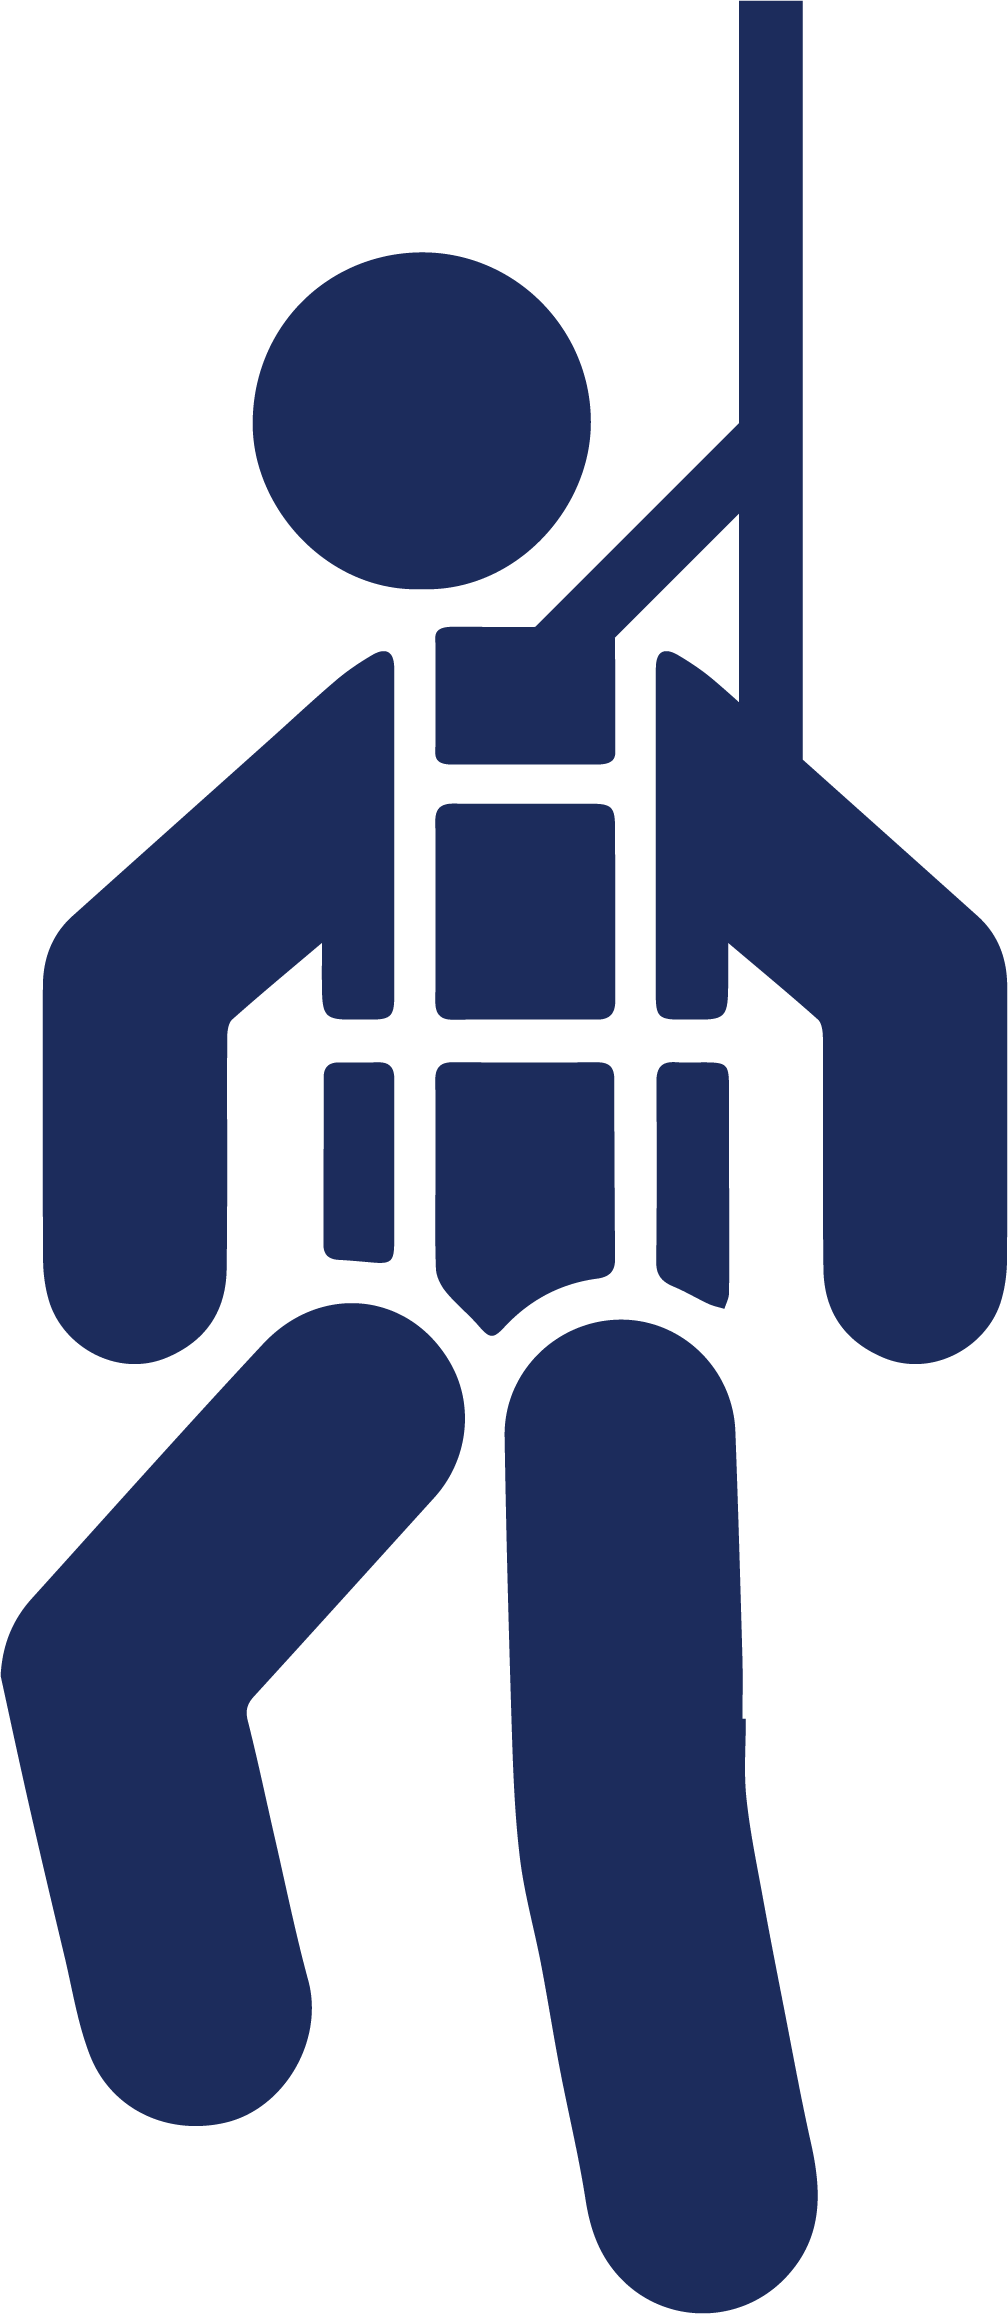 Fall Protection - Fall Protection Symbol (1008x2314)